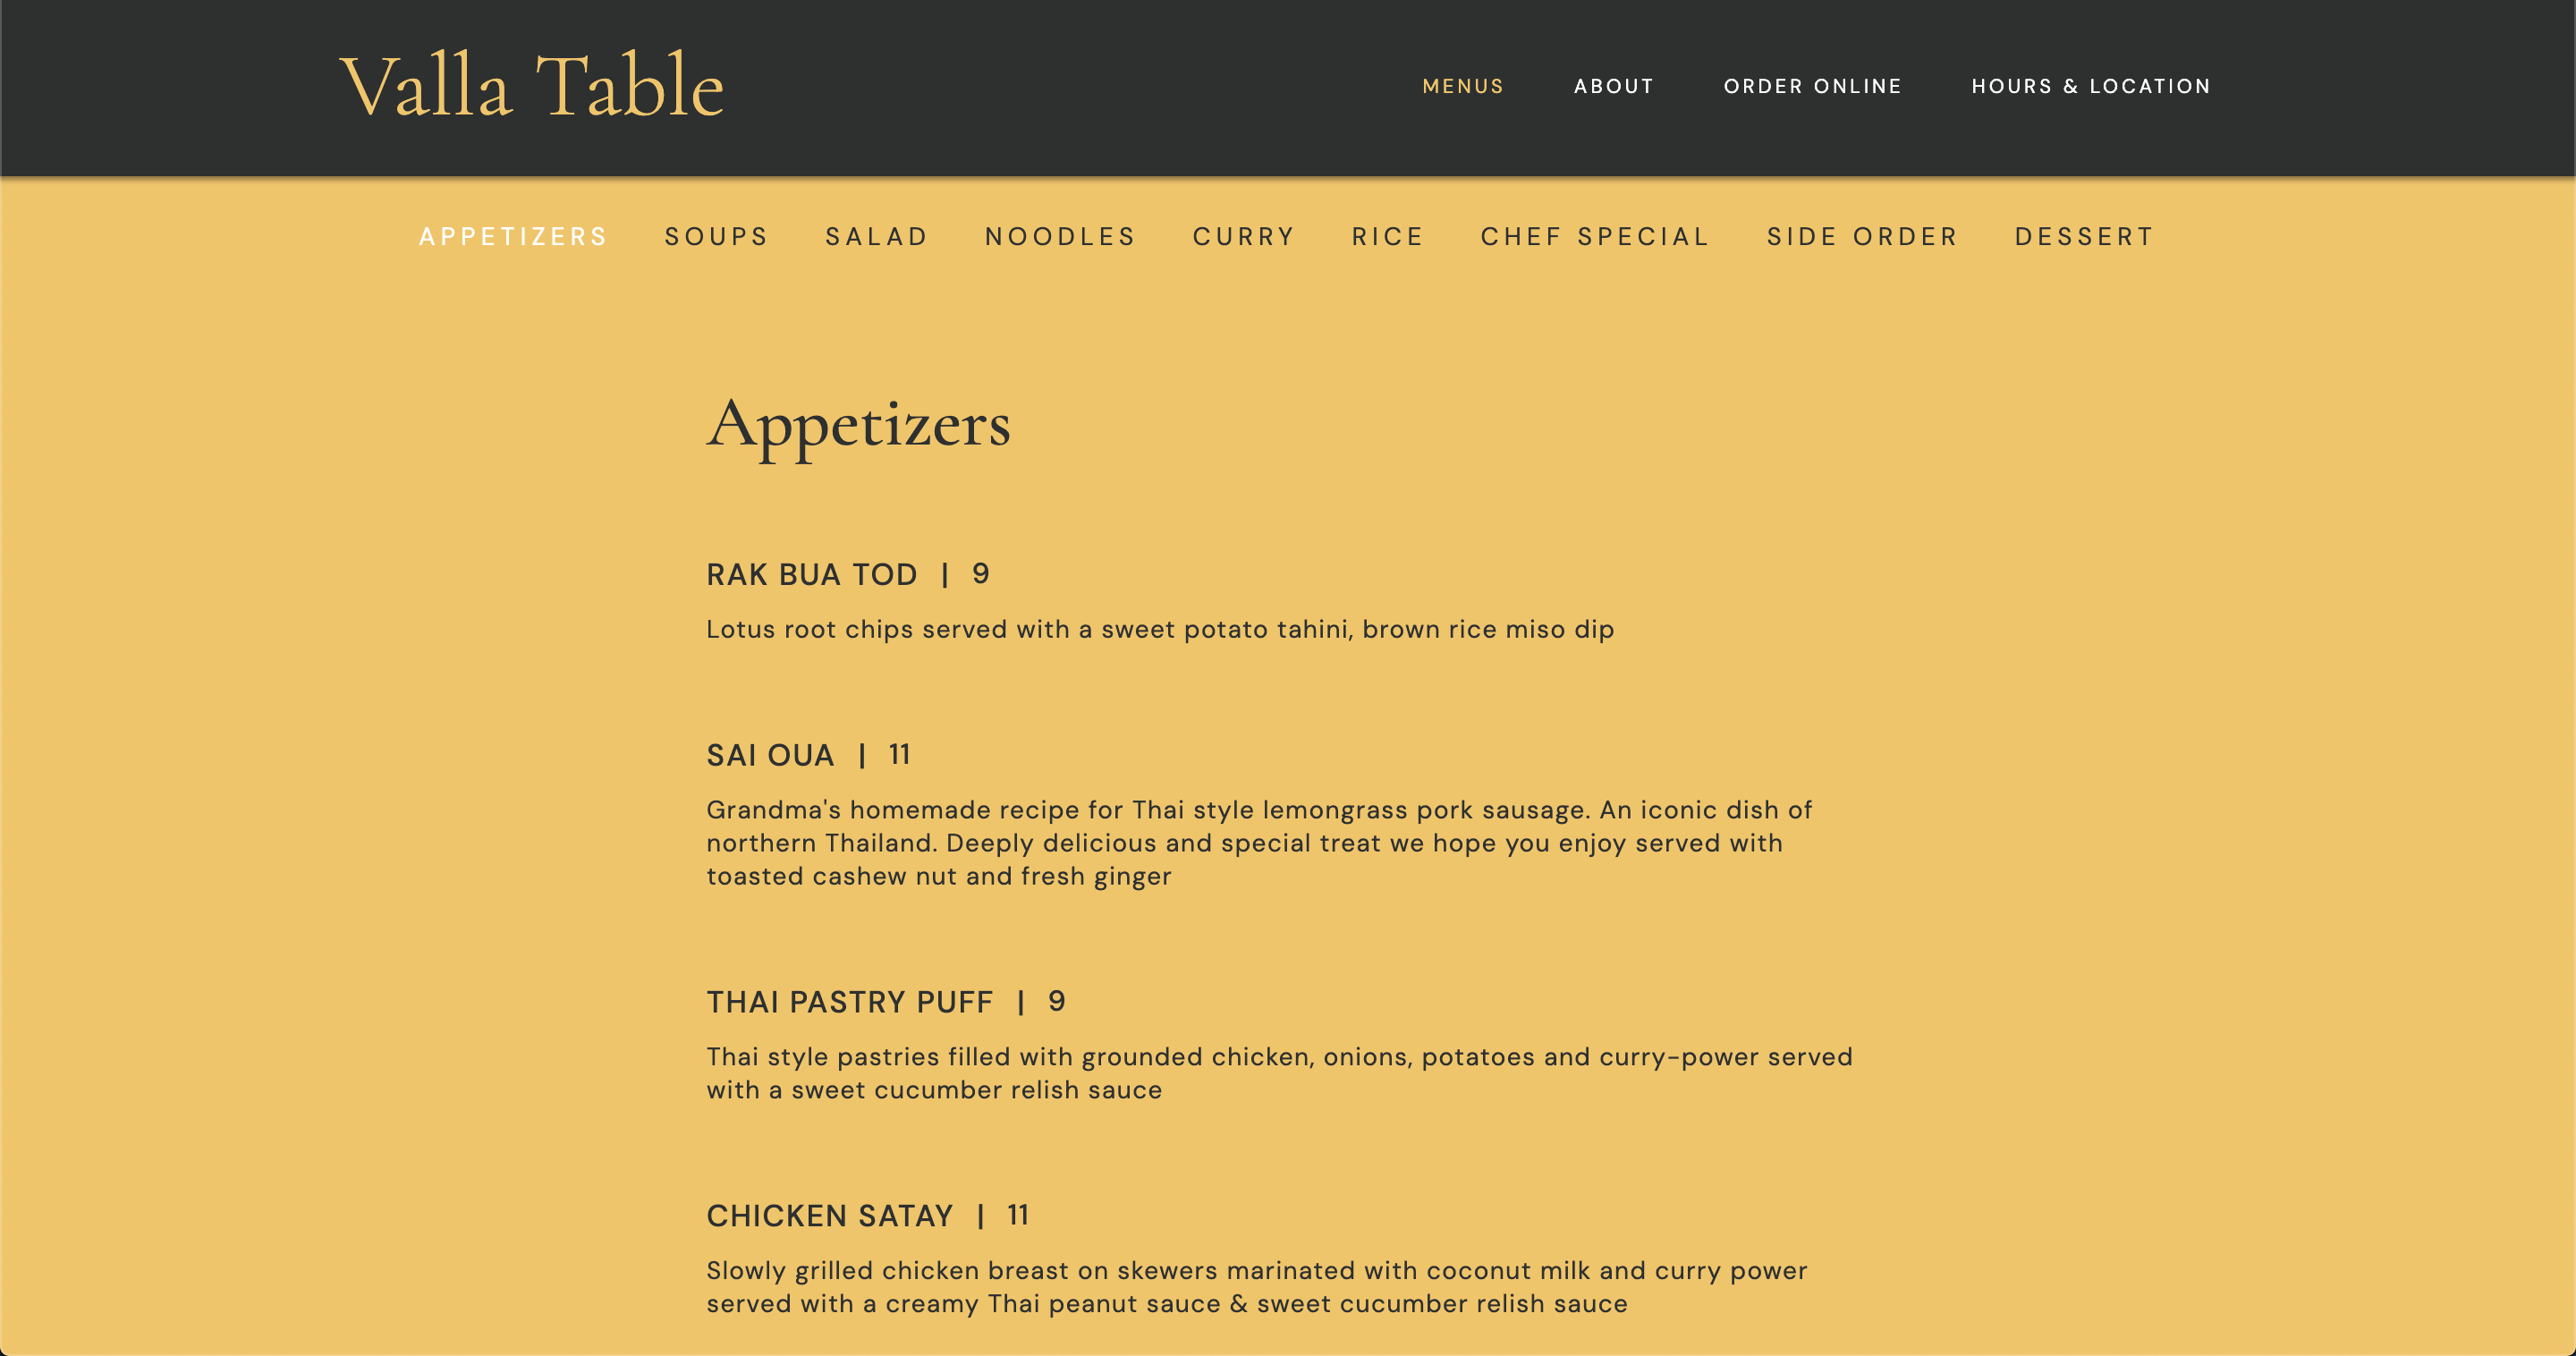 Menus page with food type options on top and a list of dishes with price and description